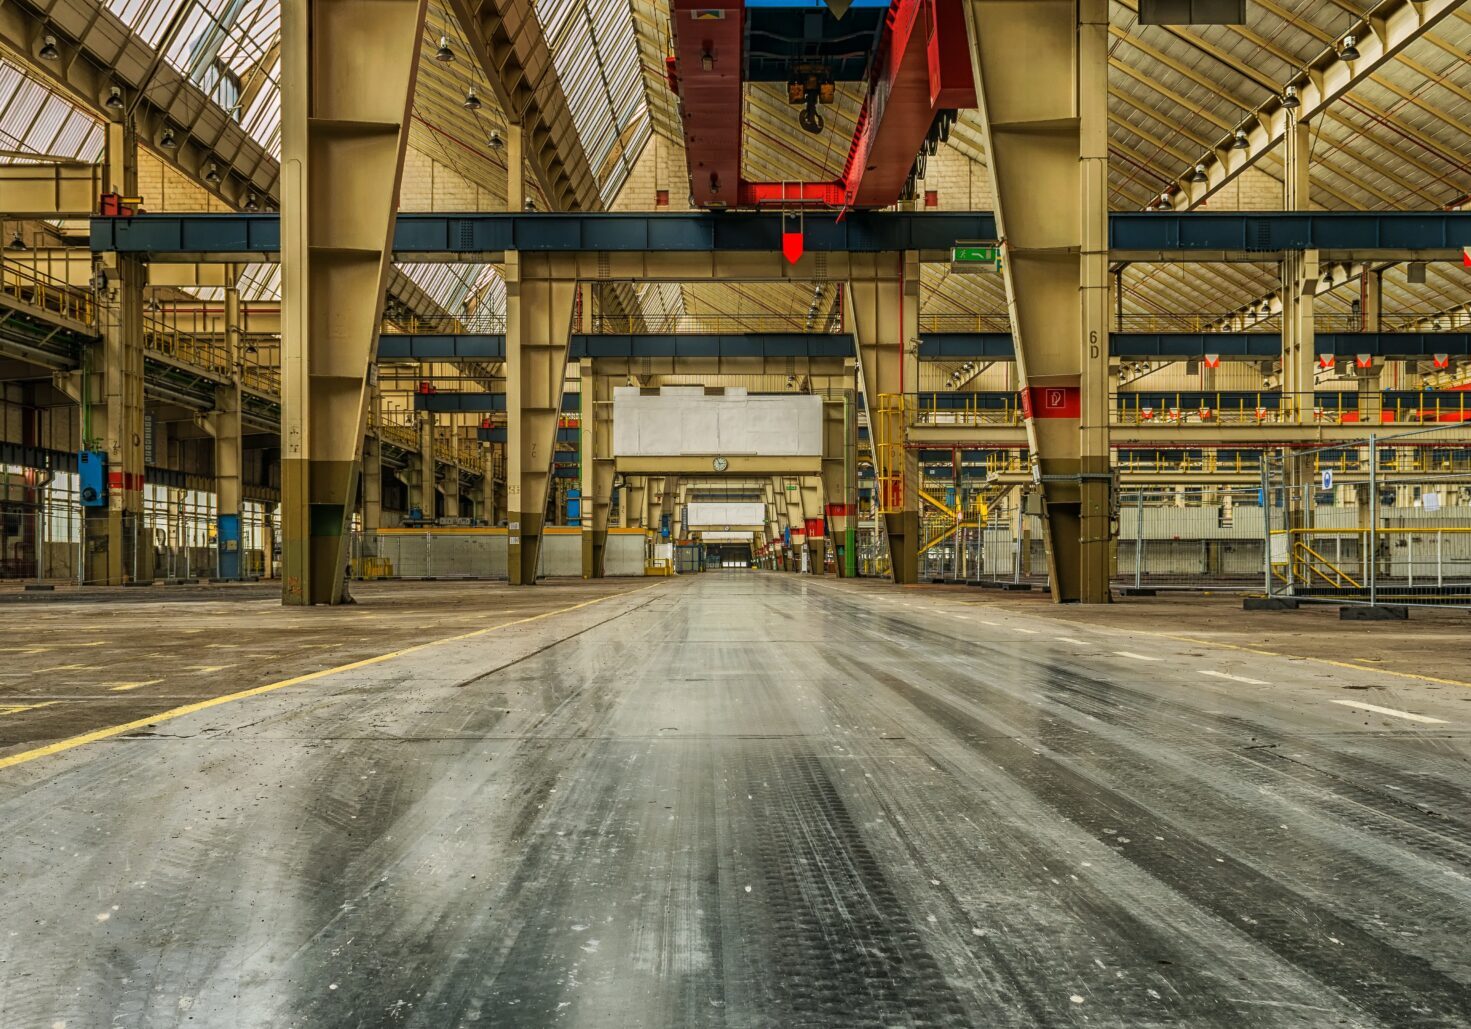 A long hallway in an empty industrial building demonstrates a commitment to continuous improvement.